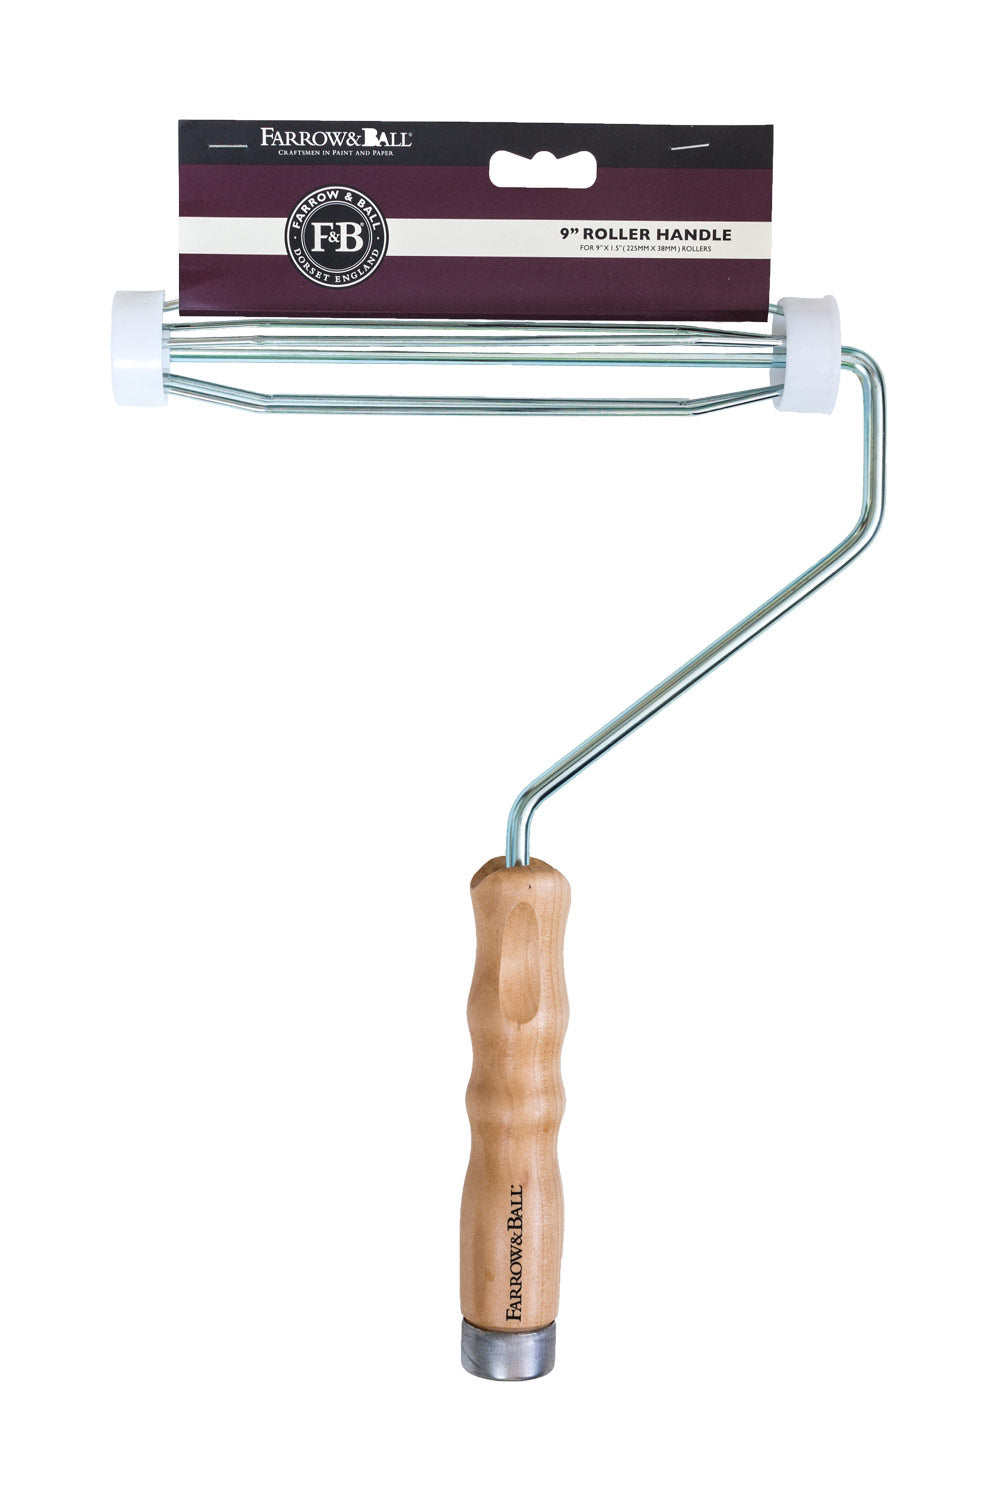 Farrow & Ball 9" Roller Handle-Exeter Paint Stores